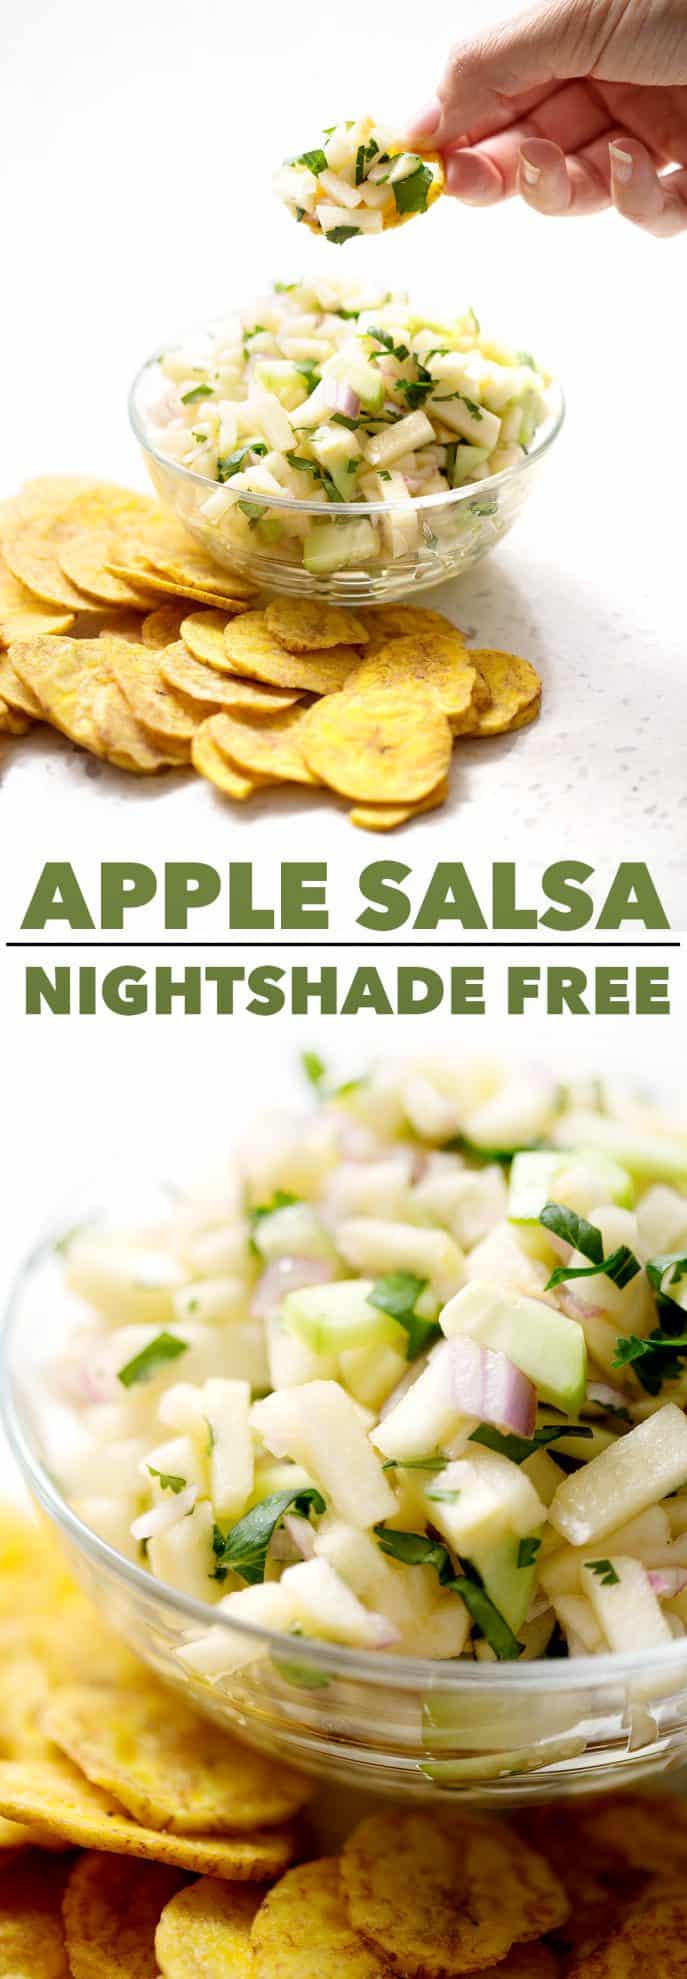 nightshade free apple salsa with plantain chips